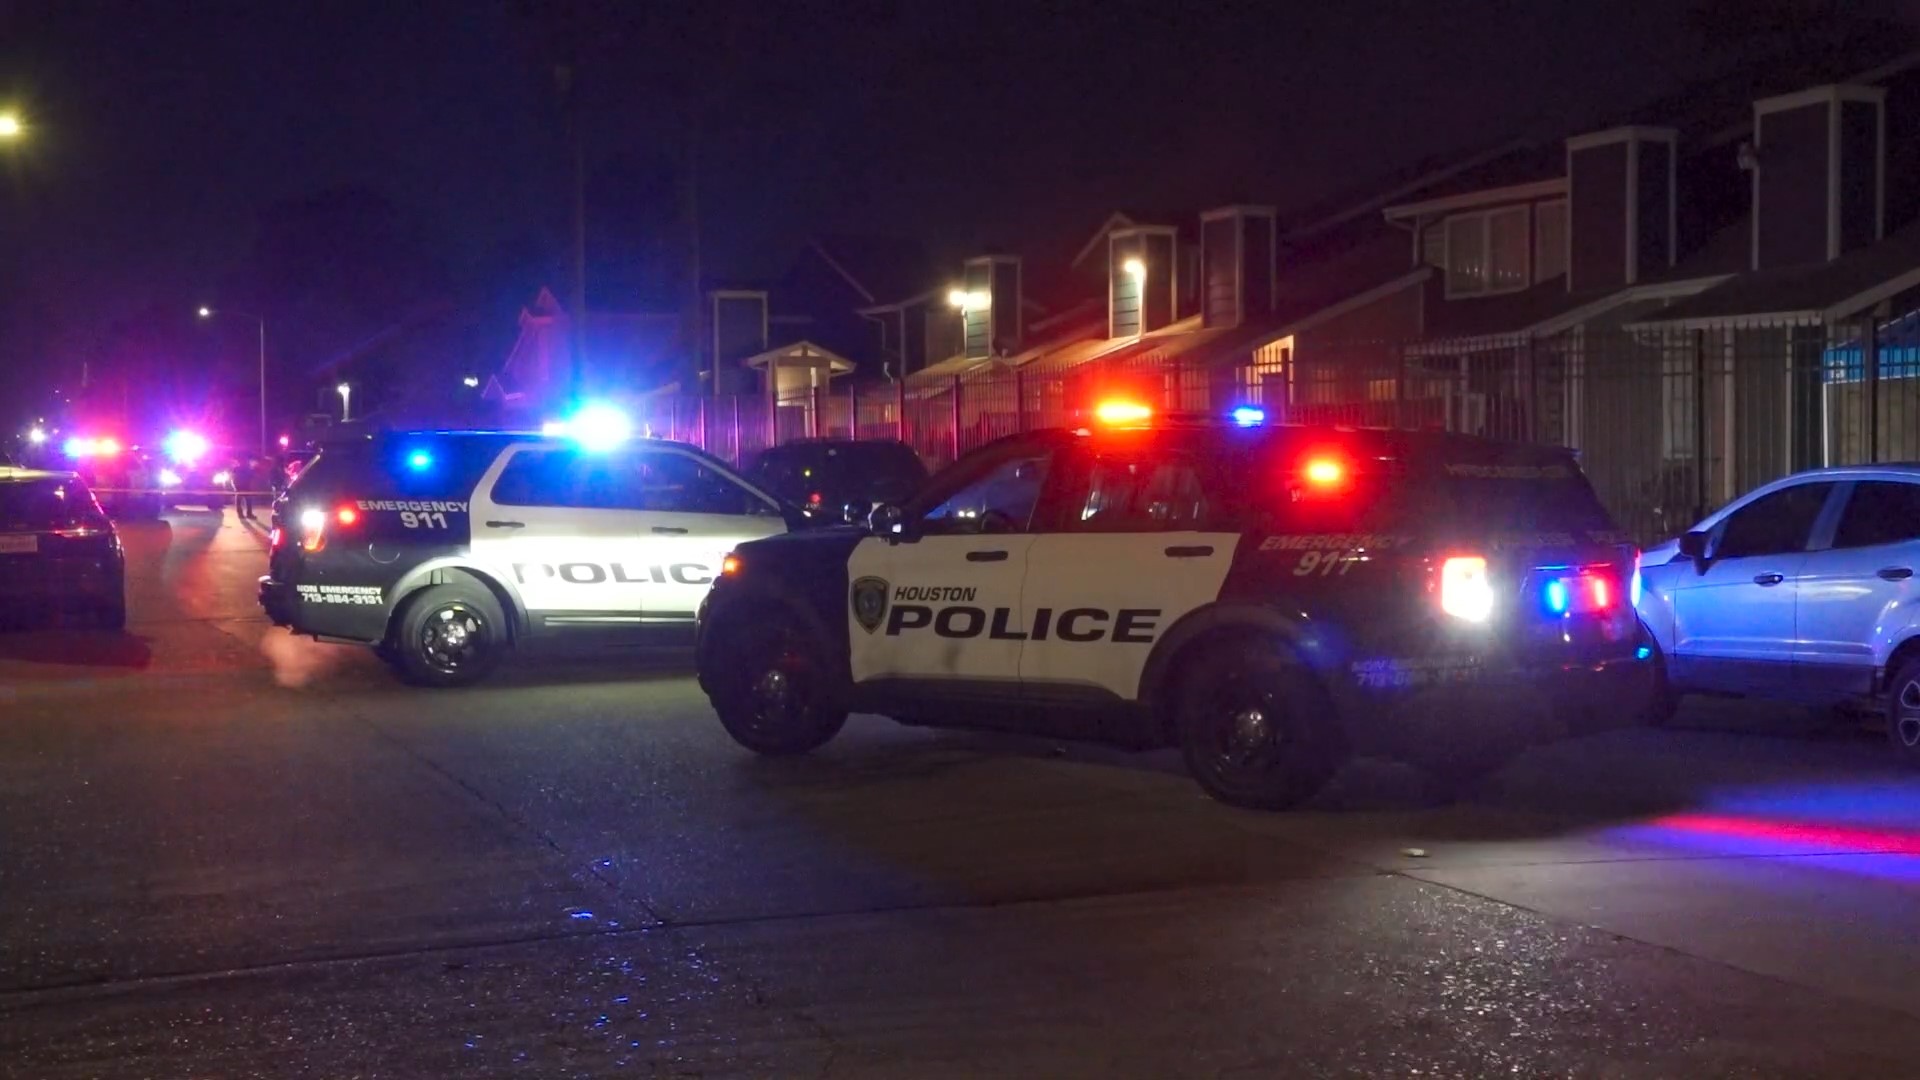 Police said they were called out to the area after residents at a nearby apartment complex heard gunshots.